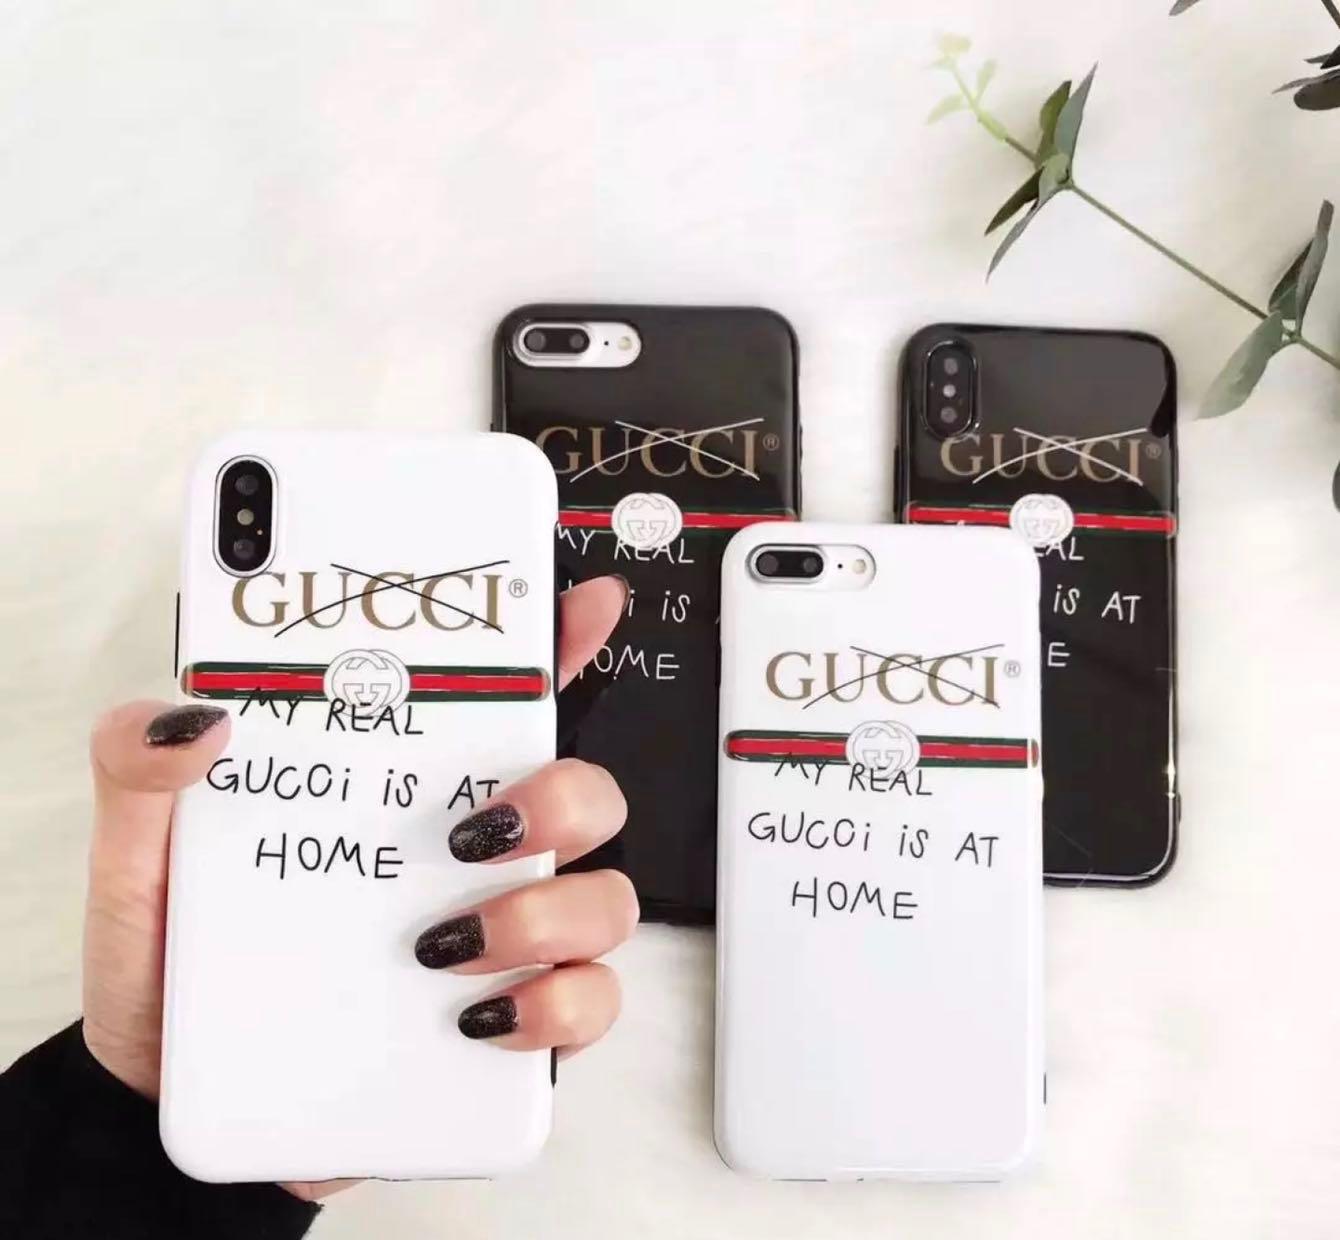 My Real Gucci is at Home iPhone Casing 